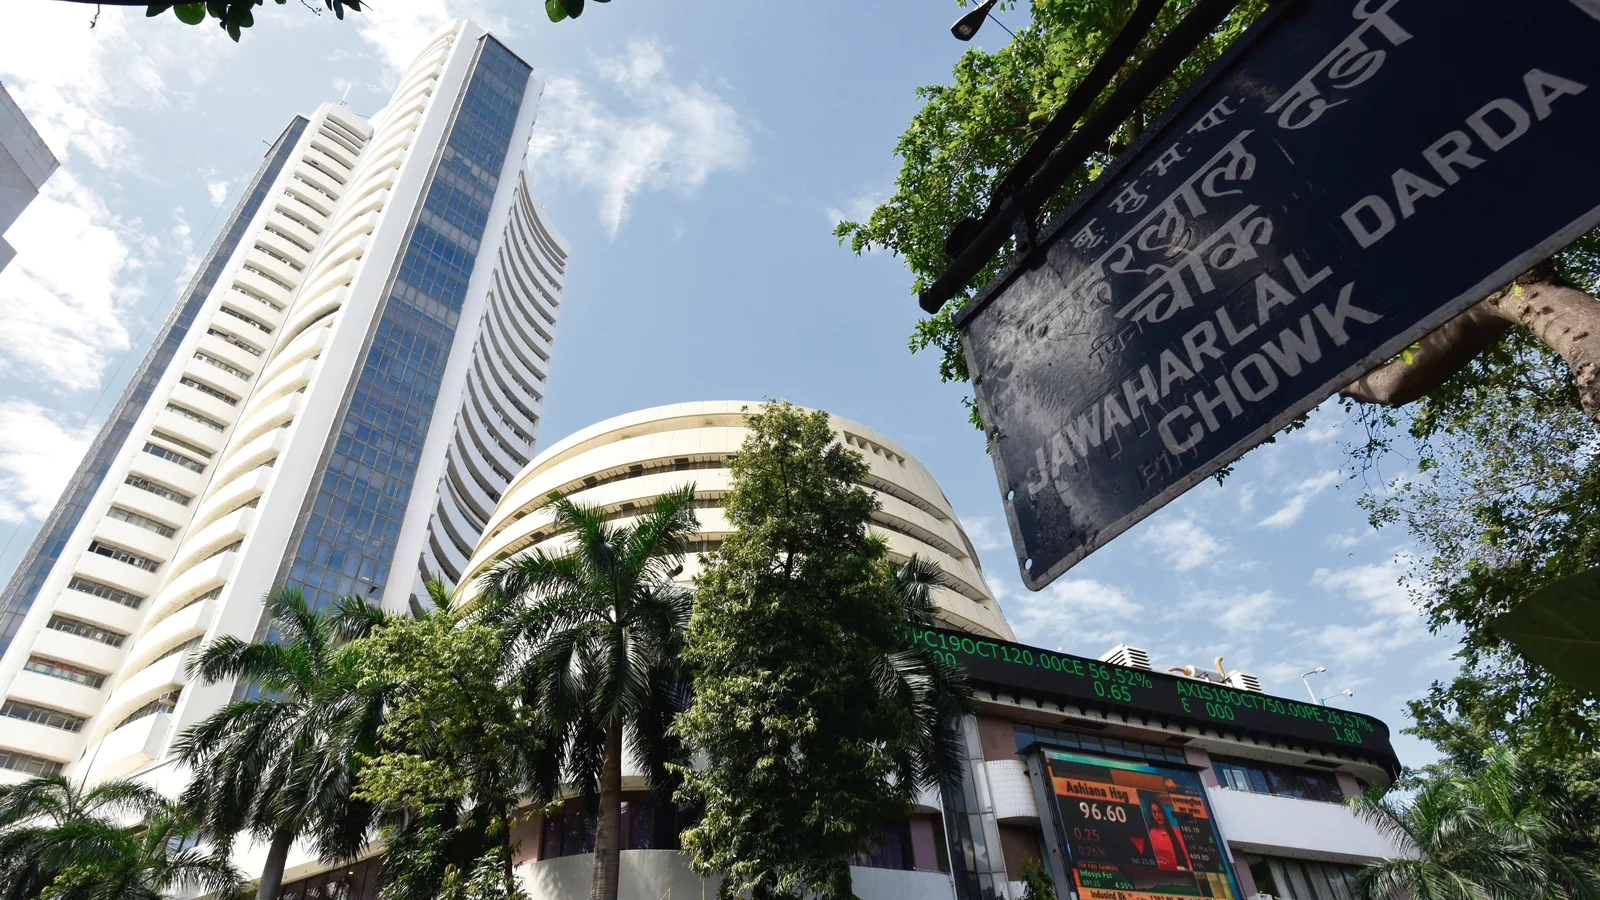 Sensex soars 708 points to end day at 59,277; Nifty closes at 17,688